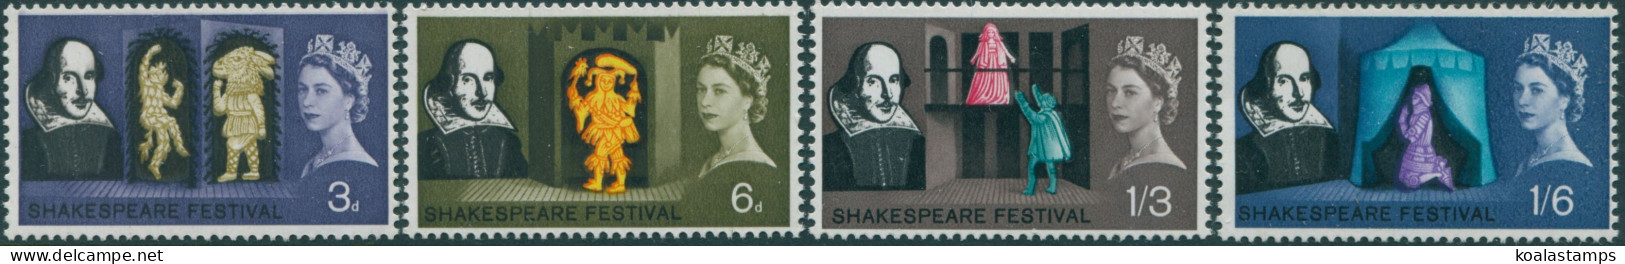 Great Britain 1964 SG646-649 QEII Shakespeare Festival MNH - Unclassified